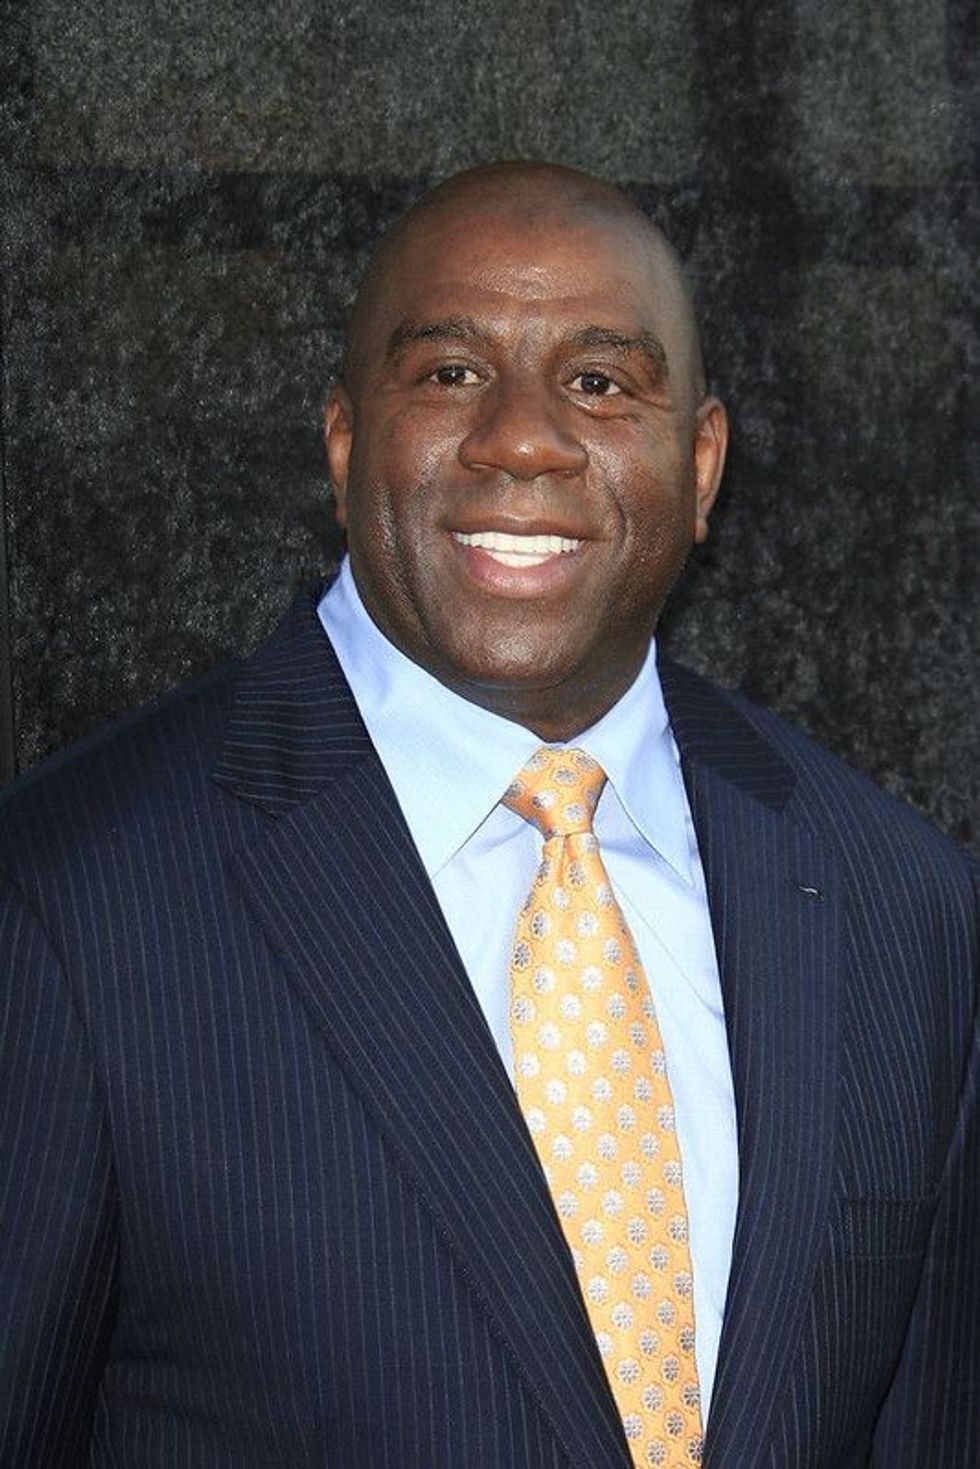 Here, you can read all the famous Magic Johnson quotes that everyone should know about.